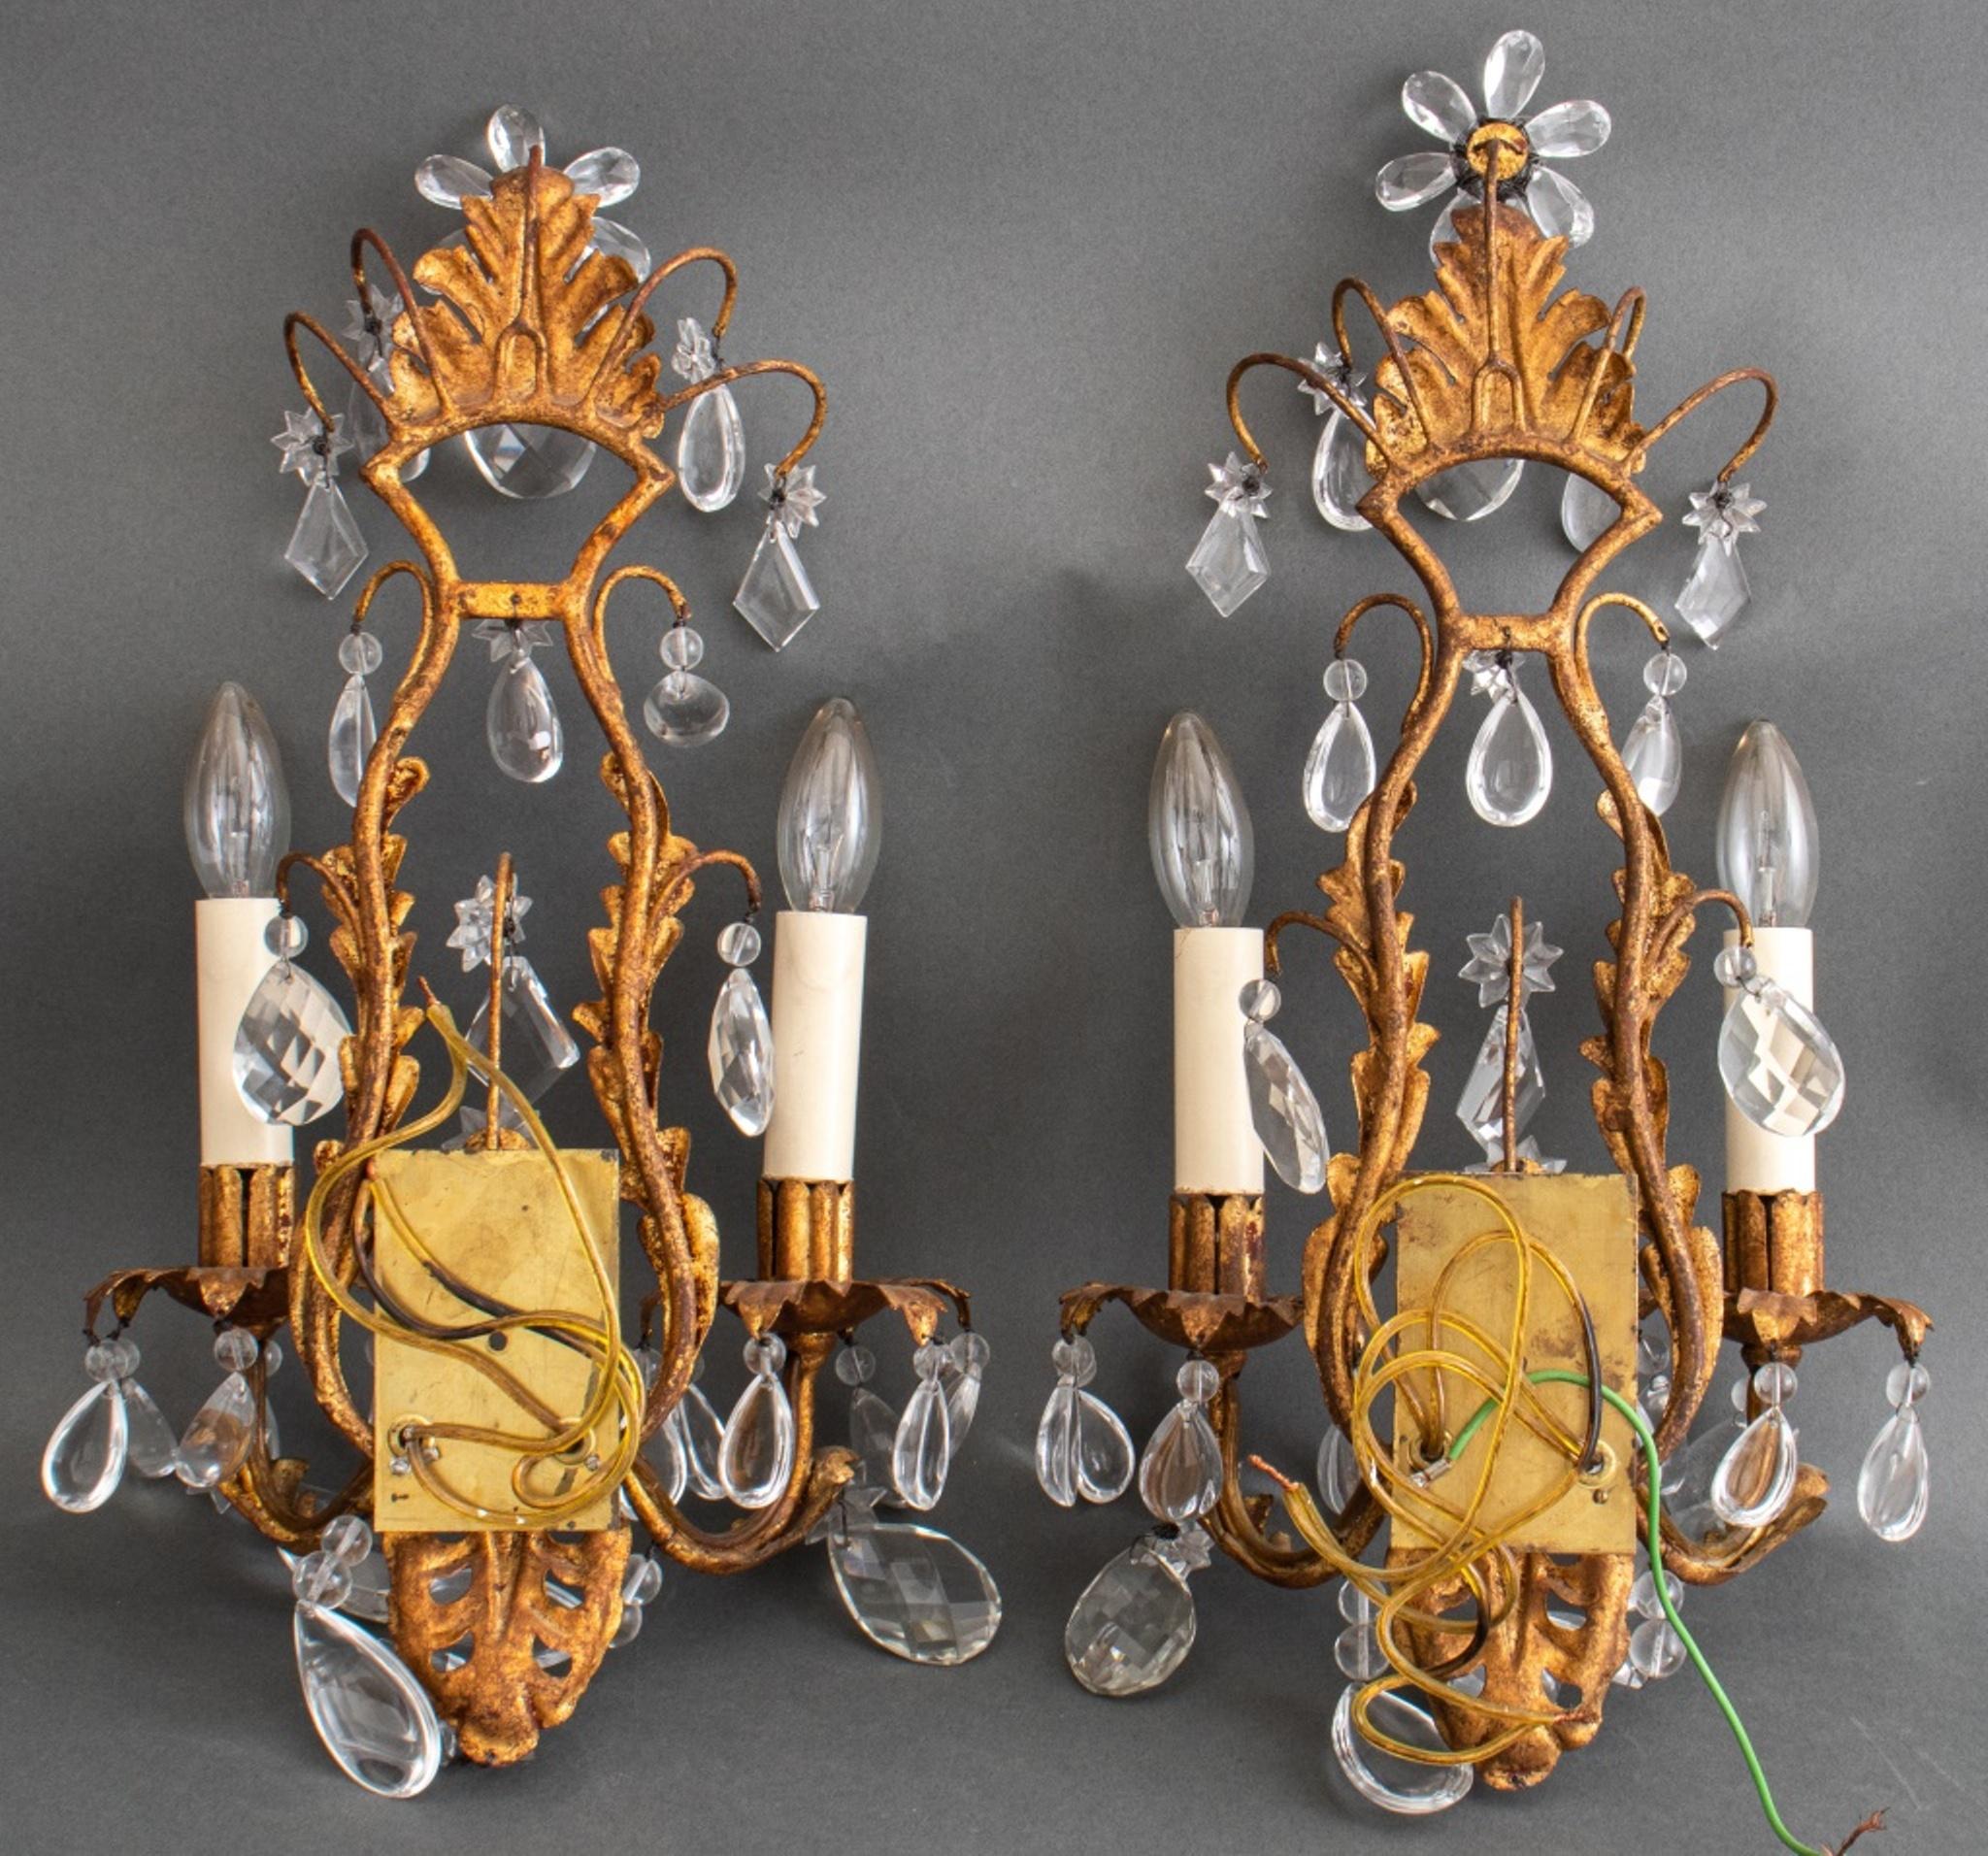 Hollywood Regency Italian Rococo Revival two-light sconces, 1960s-1970s, each with reticulated scrolling gilt metal mounts on a gilt metal cage frame issuing three arms, the whole hung with crystals and wired with floriform ornaments. In very good